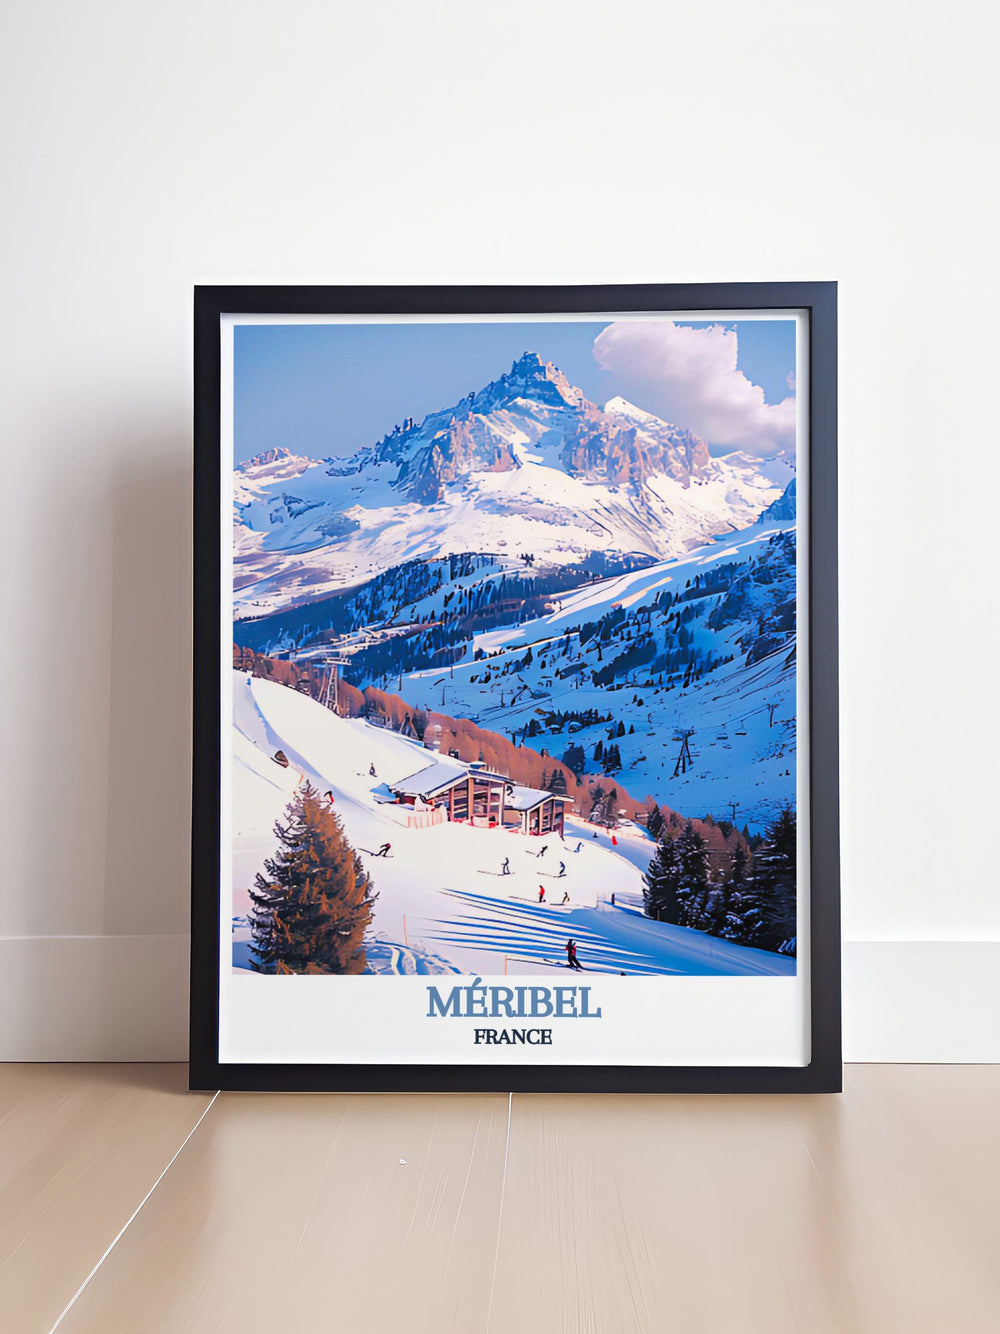 Showcasing both Méribel and Rond Point des Pistes, this travel poster captures the unique blend of thrilling snowboarding and lively mountain life, perfect for enhancing your living space with alpine charm.